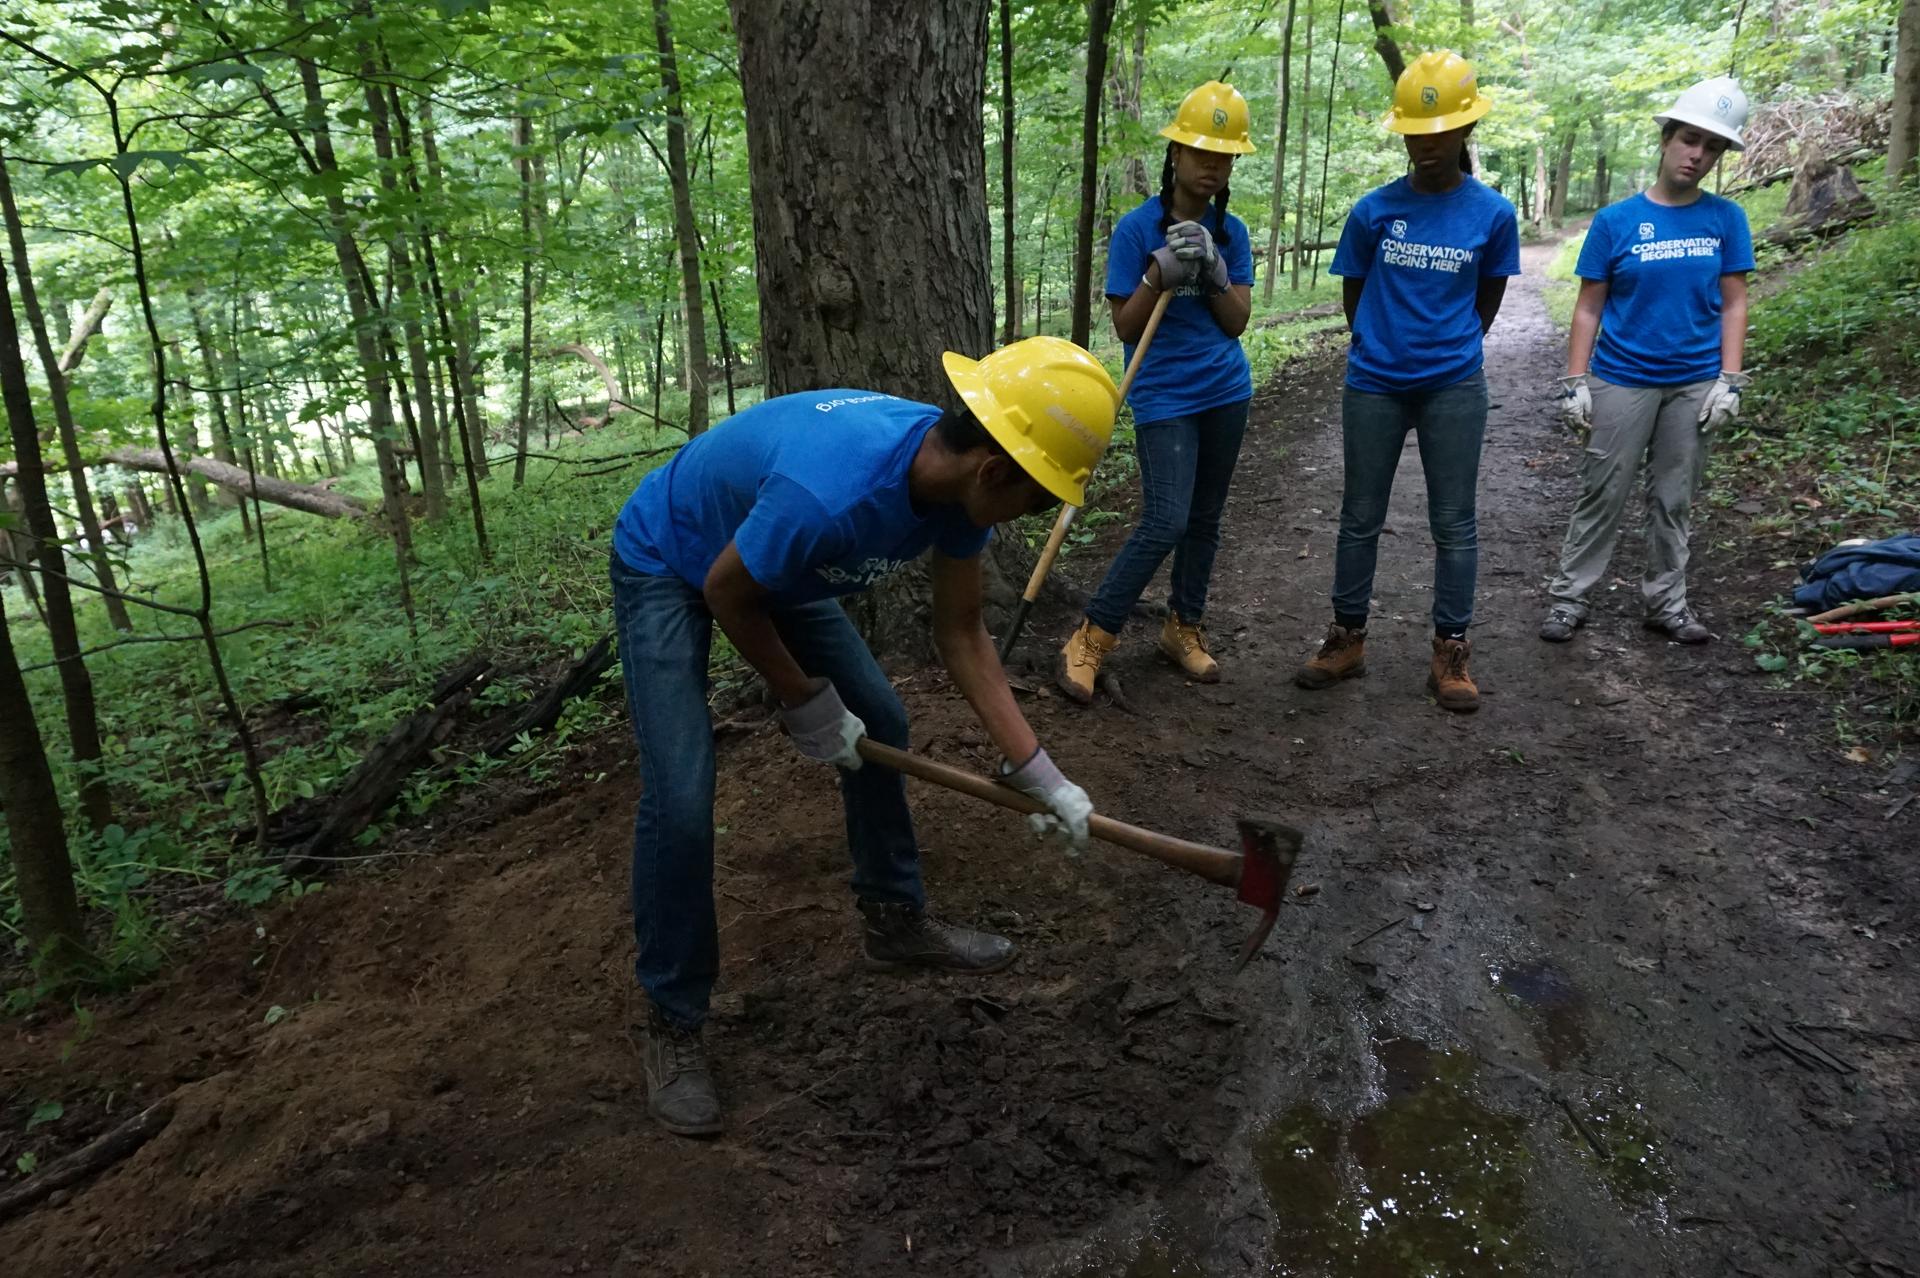 Several young people wearing gloves and helmets work in a park, one digs with a shovel